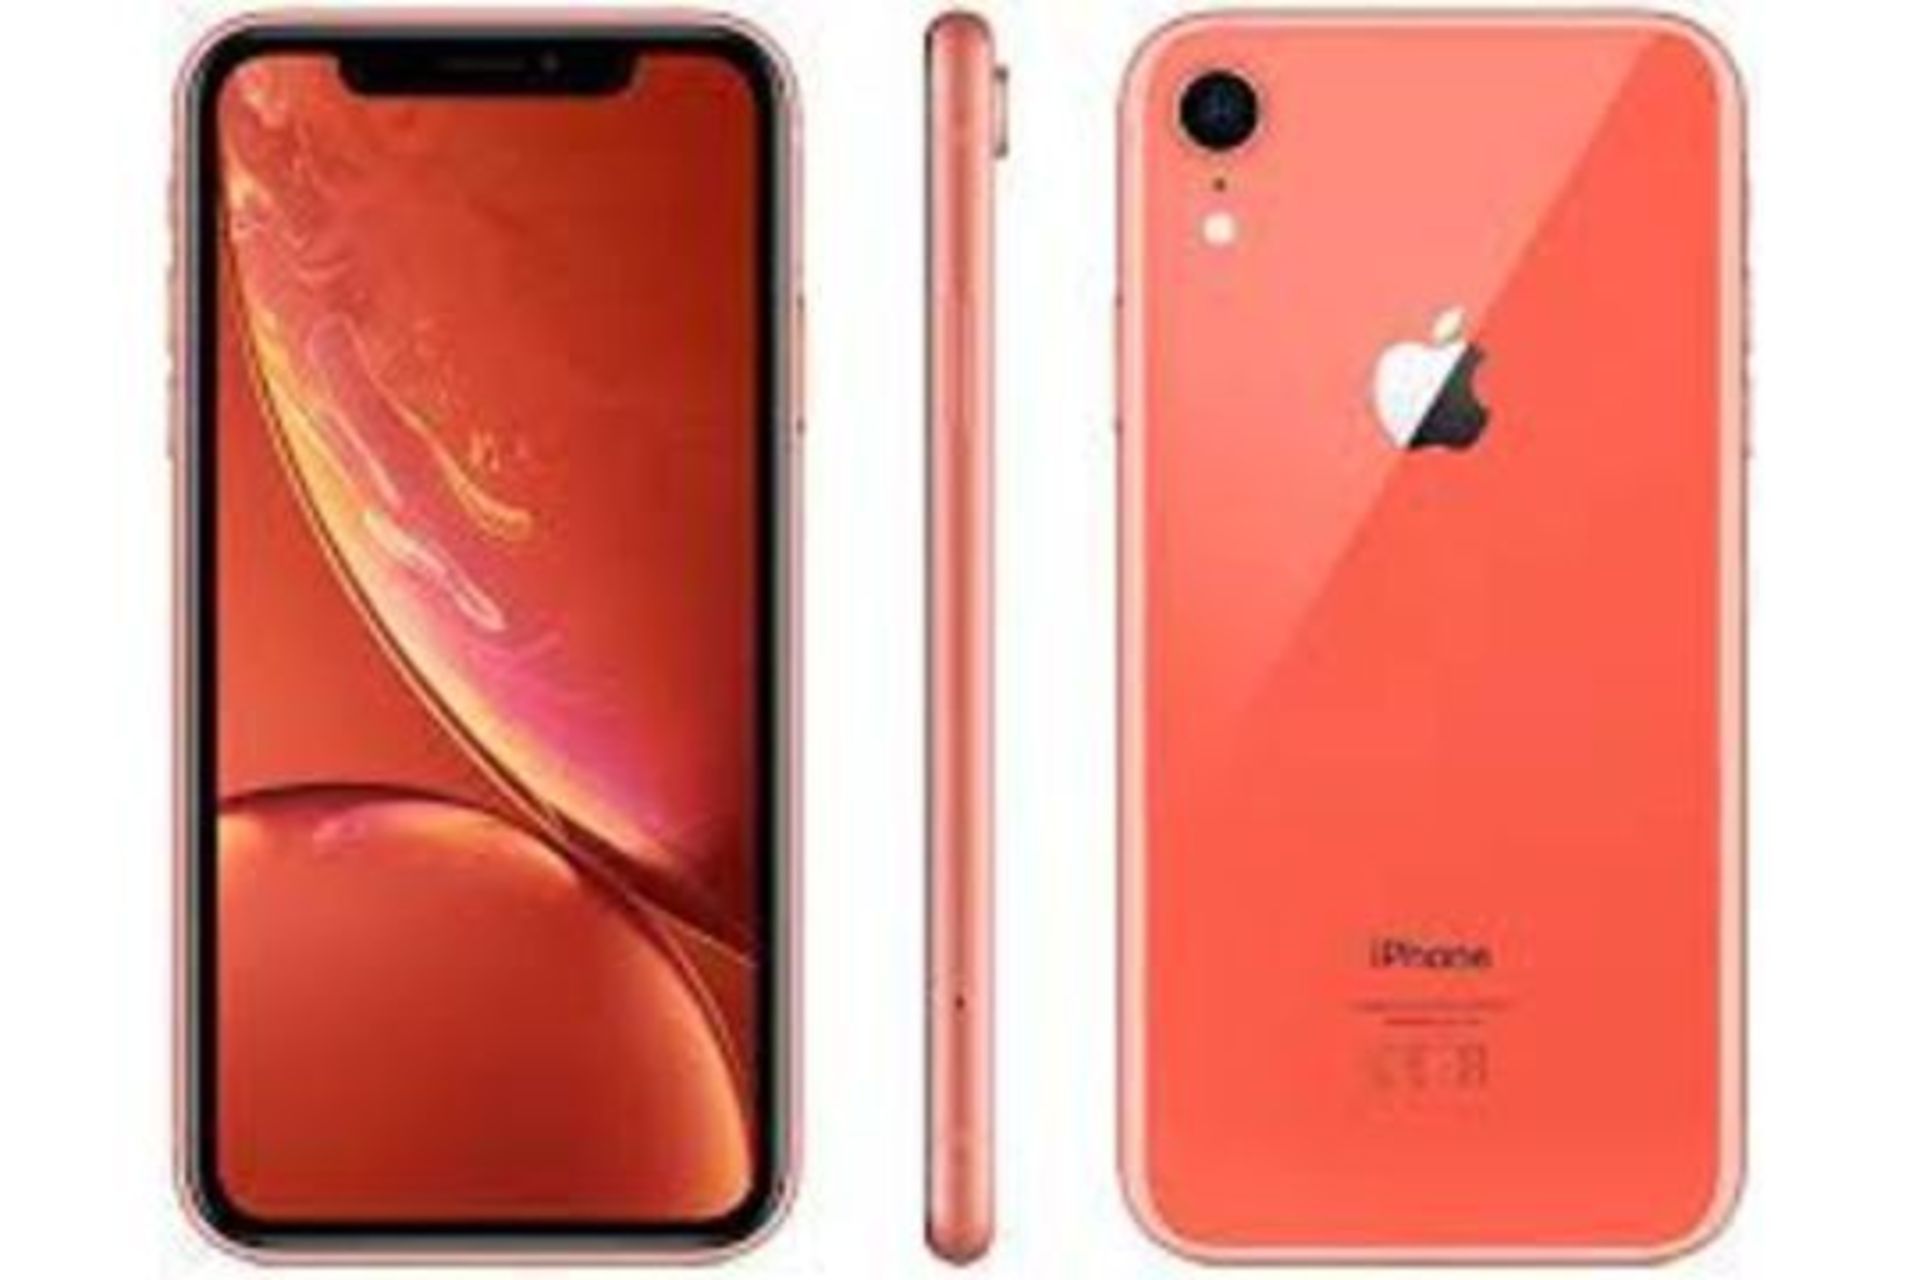 APPLE IPHONE XR 64GB RED